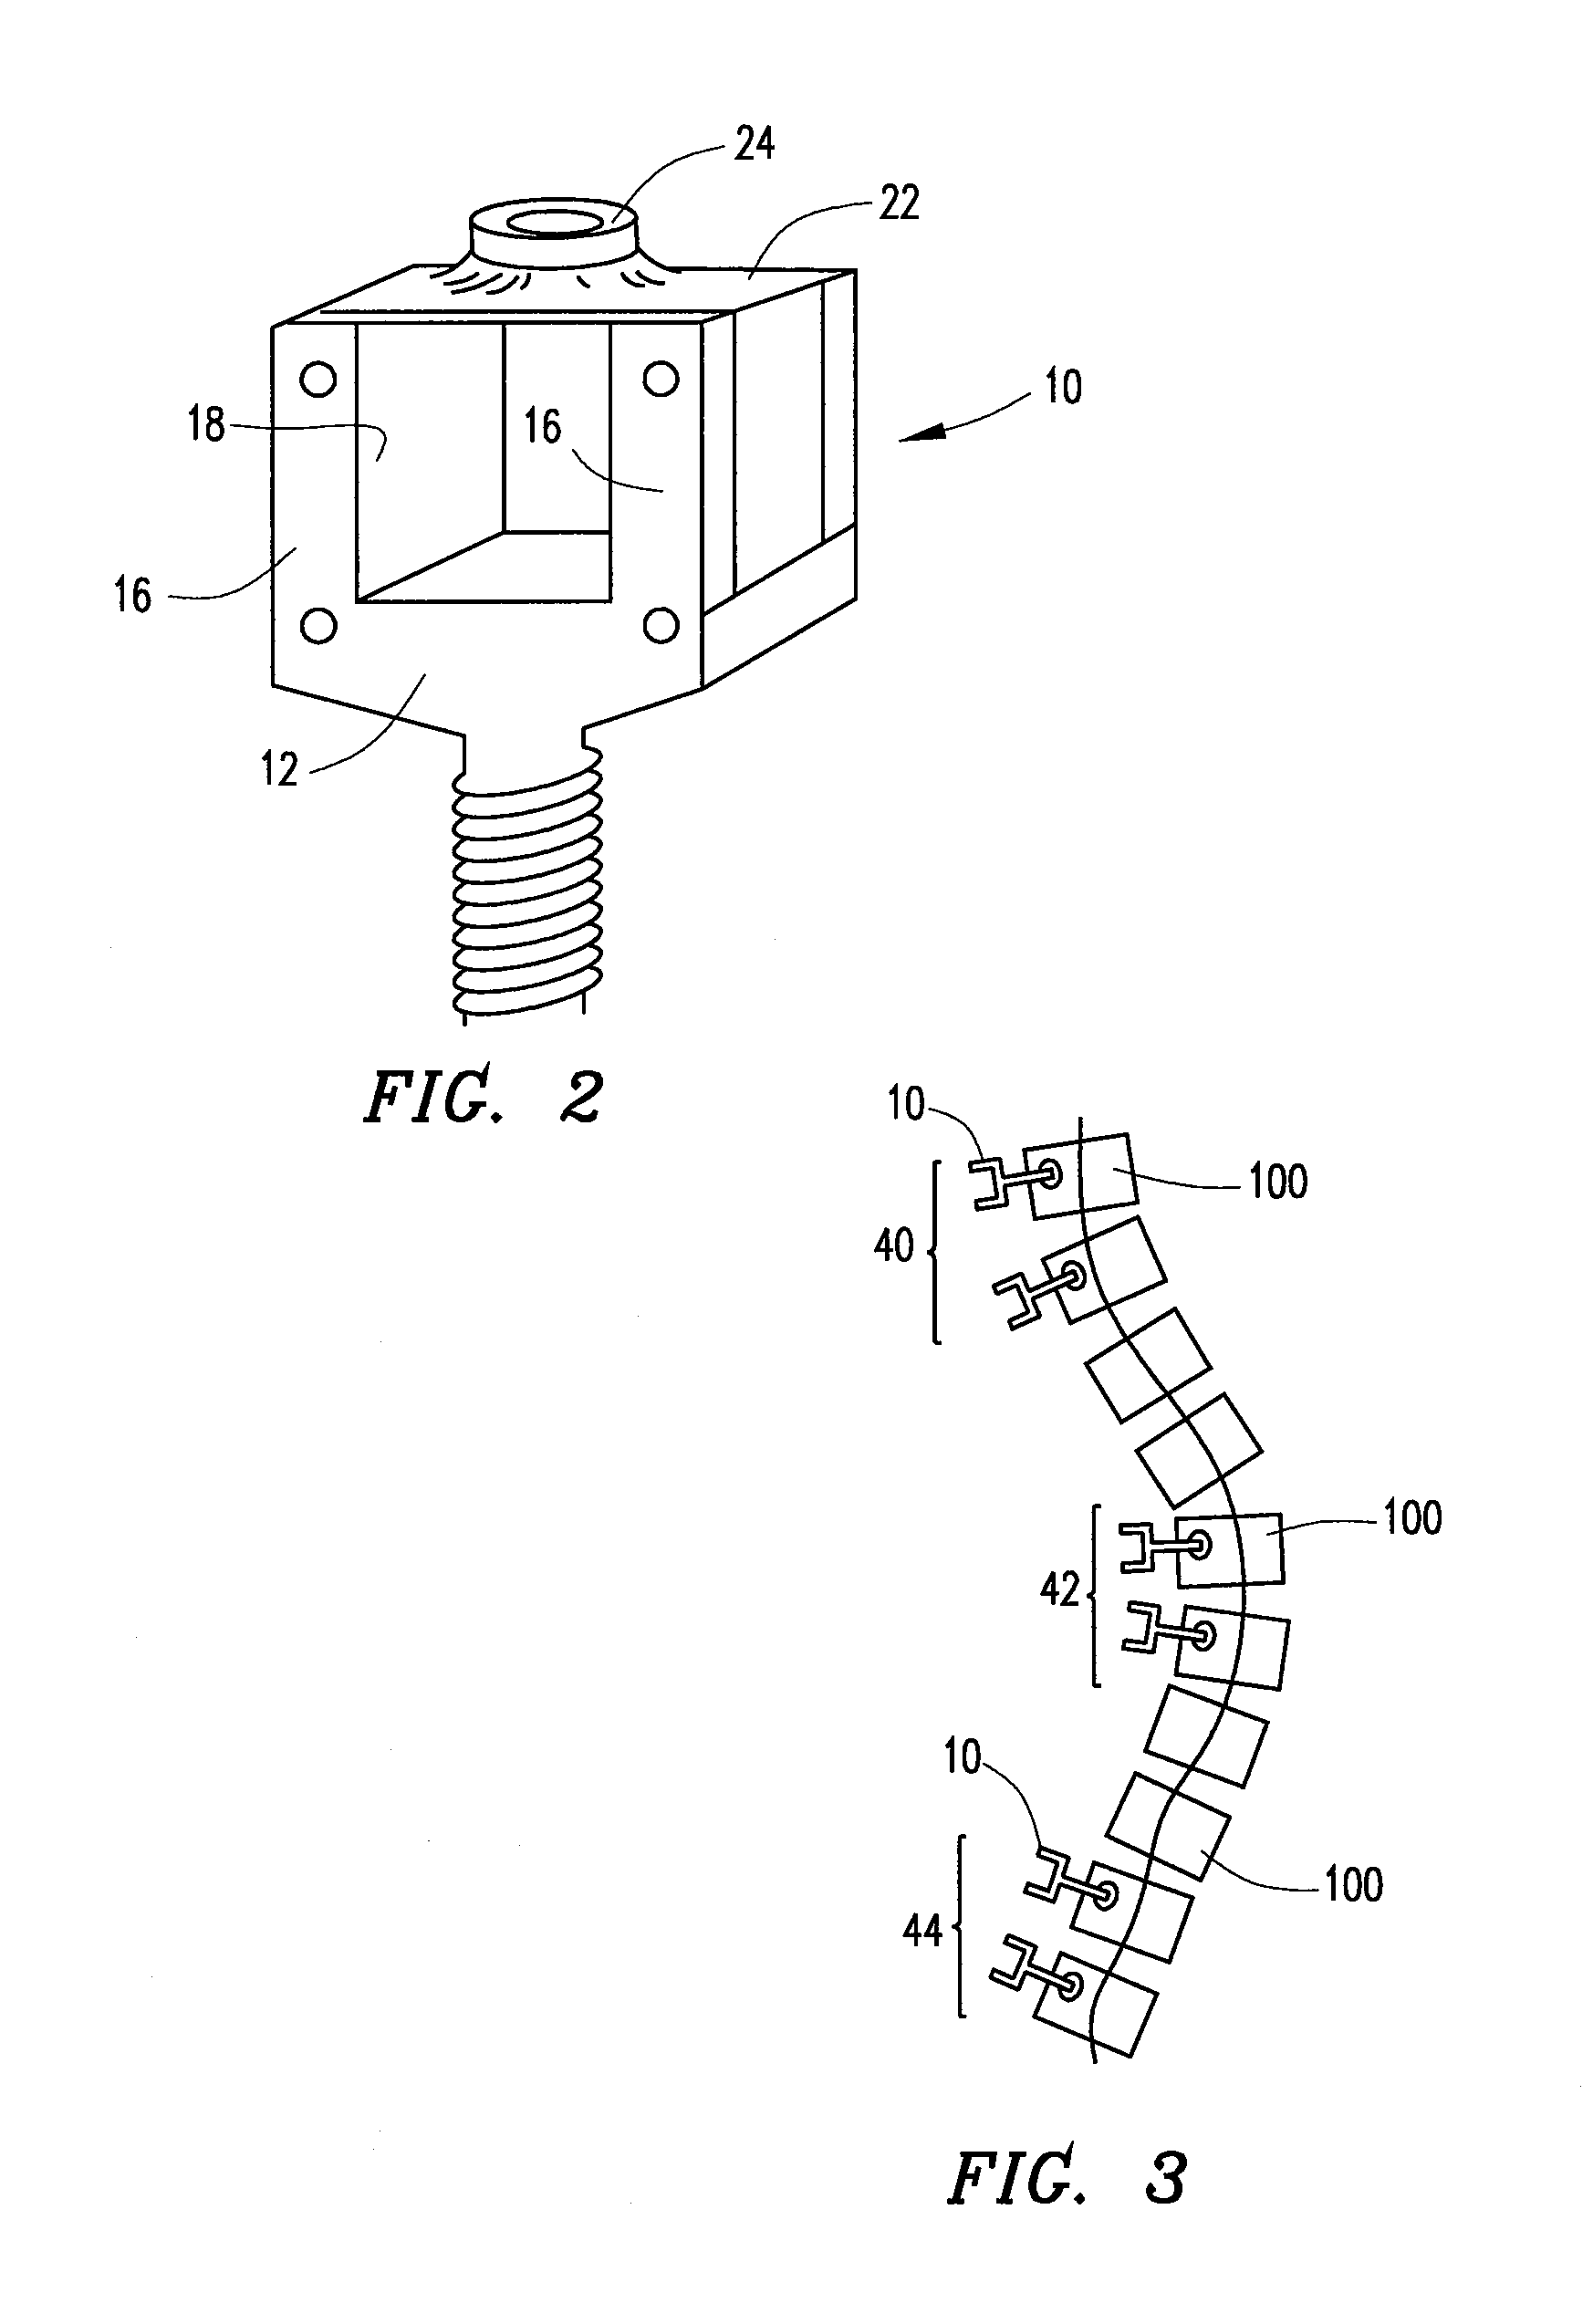 System and method for aligning vertebrae in the amelioration of aberrant spinal column deviation conditions in patients requiring the accomodation of spinal column growth or elongation